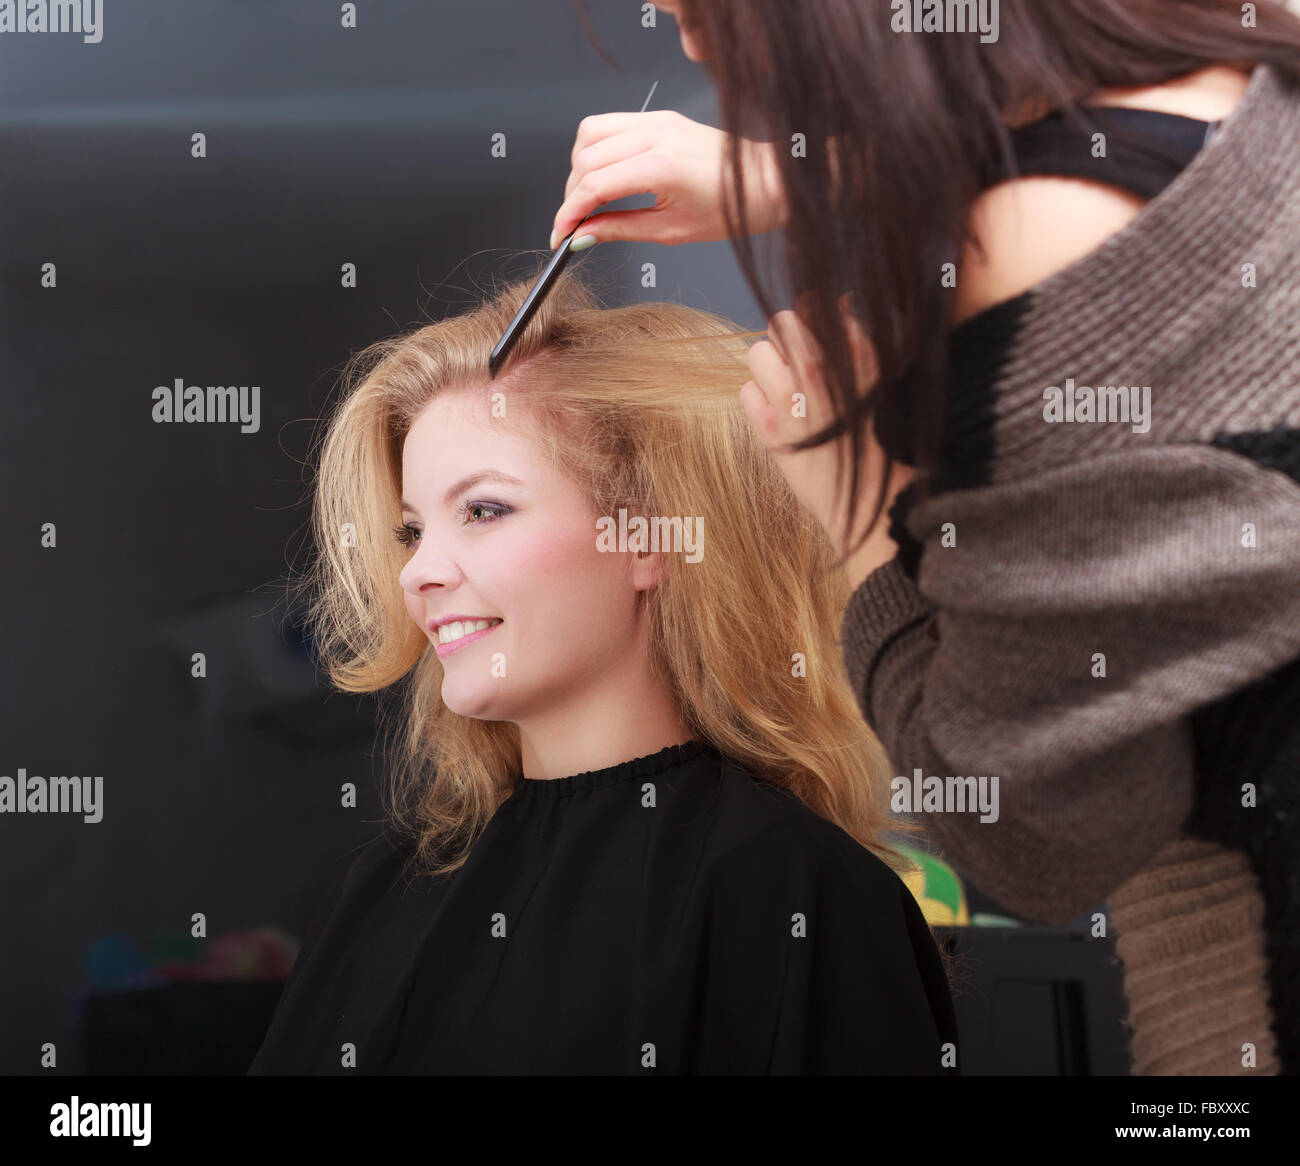 Beautiful smiling girl with blond wavy hair by hairdresser. Hairstylist combing female client. Young woman in hairdressing beaut Stock Photo